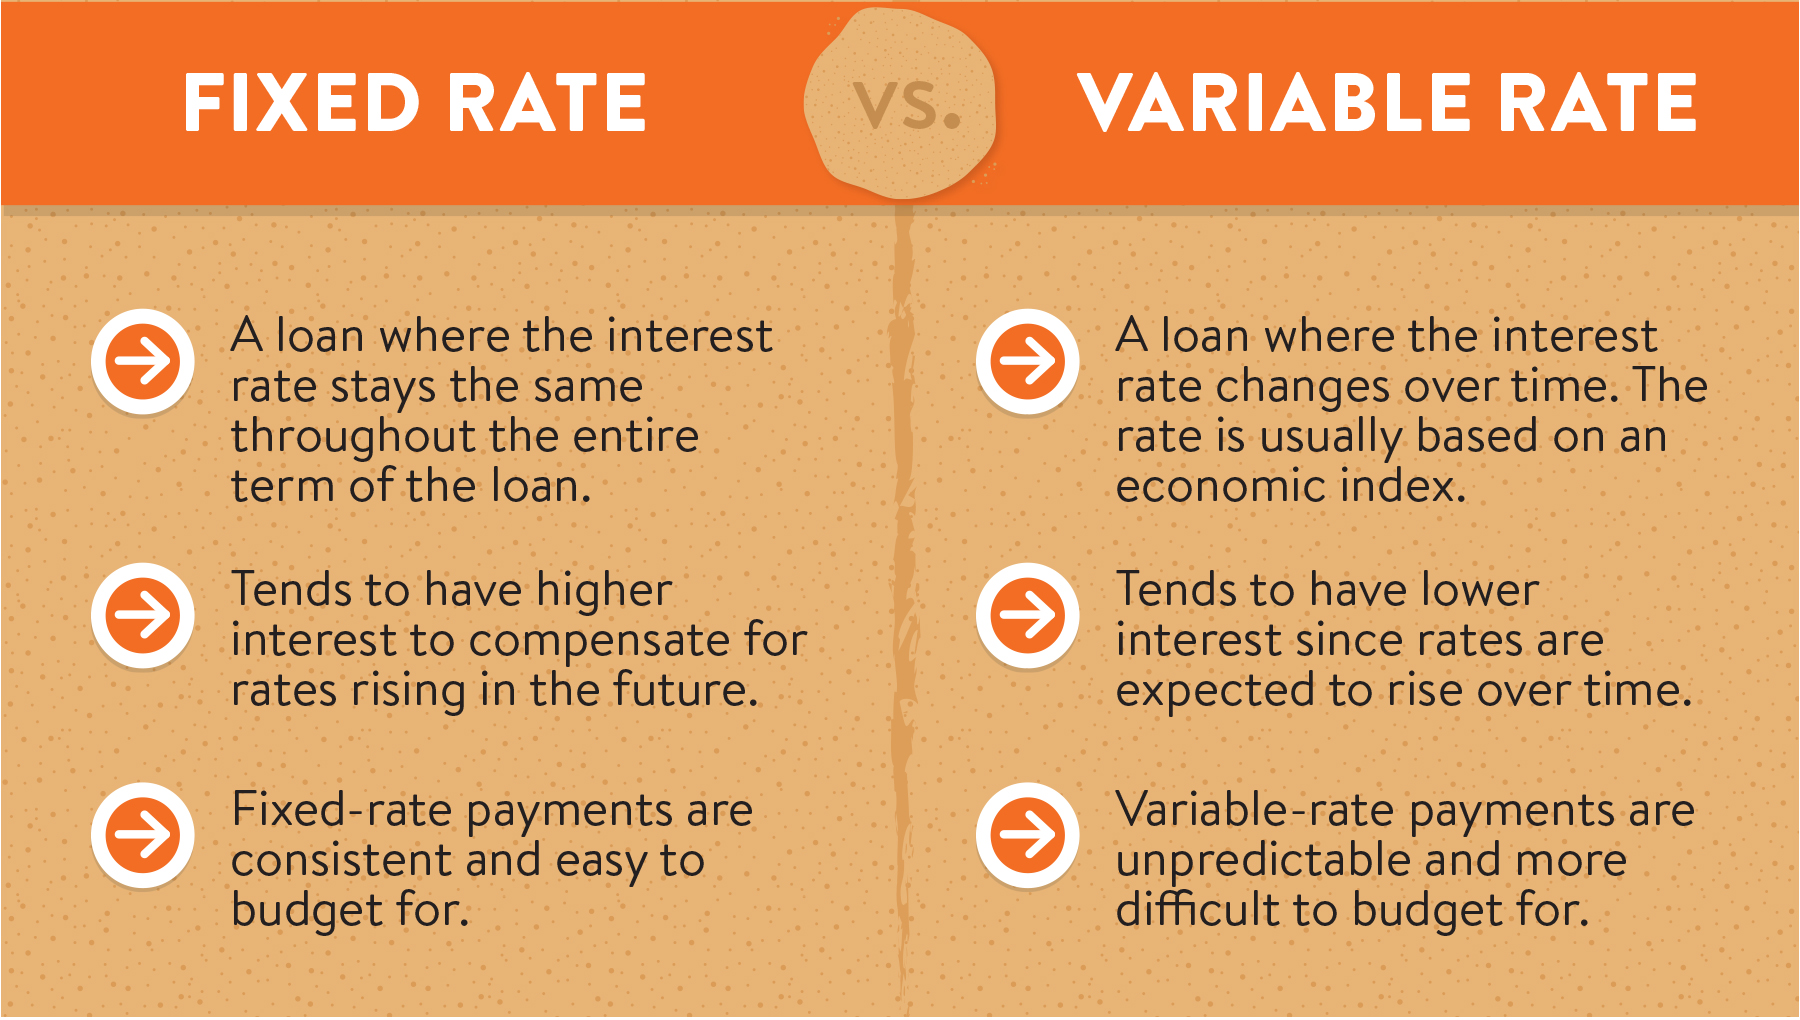 Loan Basics: Fixed Rate loans have an interest rate that stays the same. Variable Rate loans have interest rates that can change.